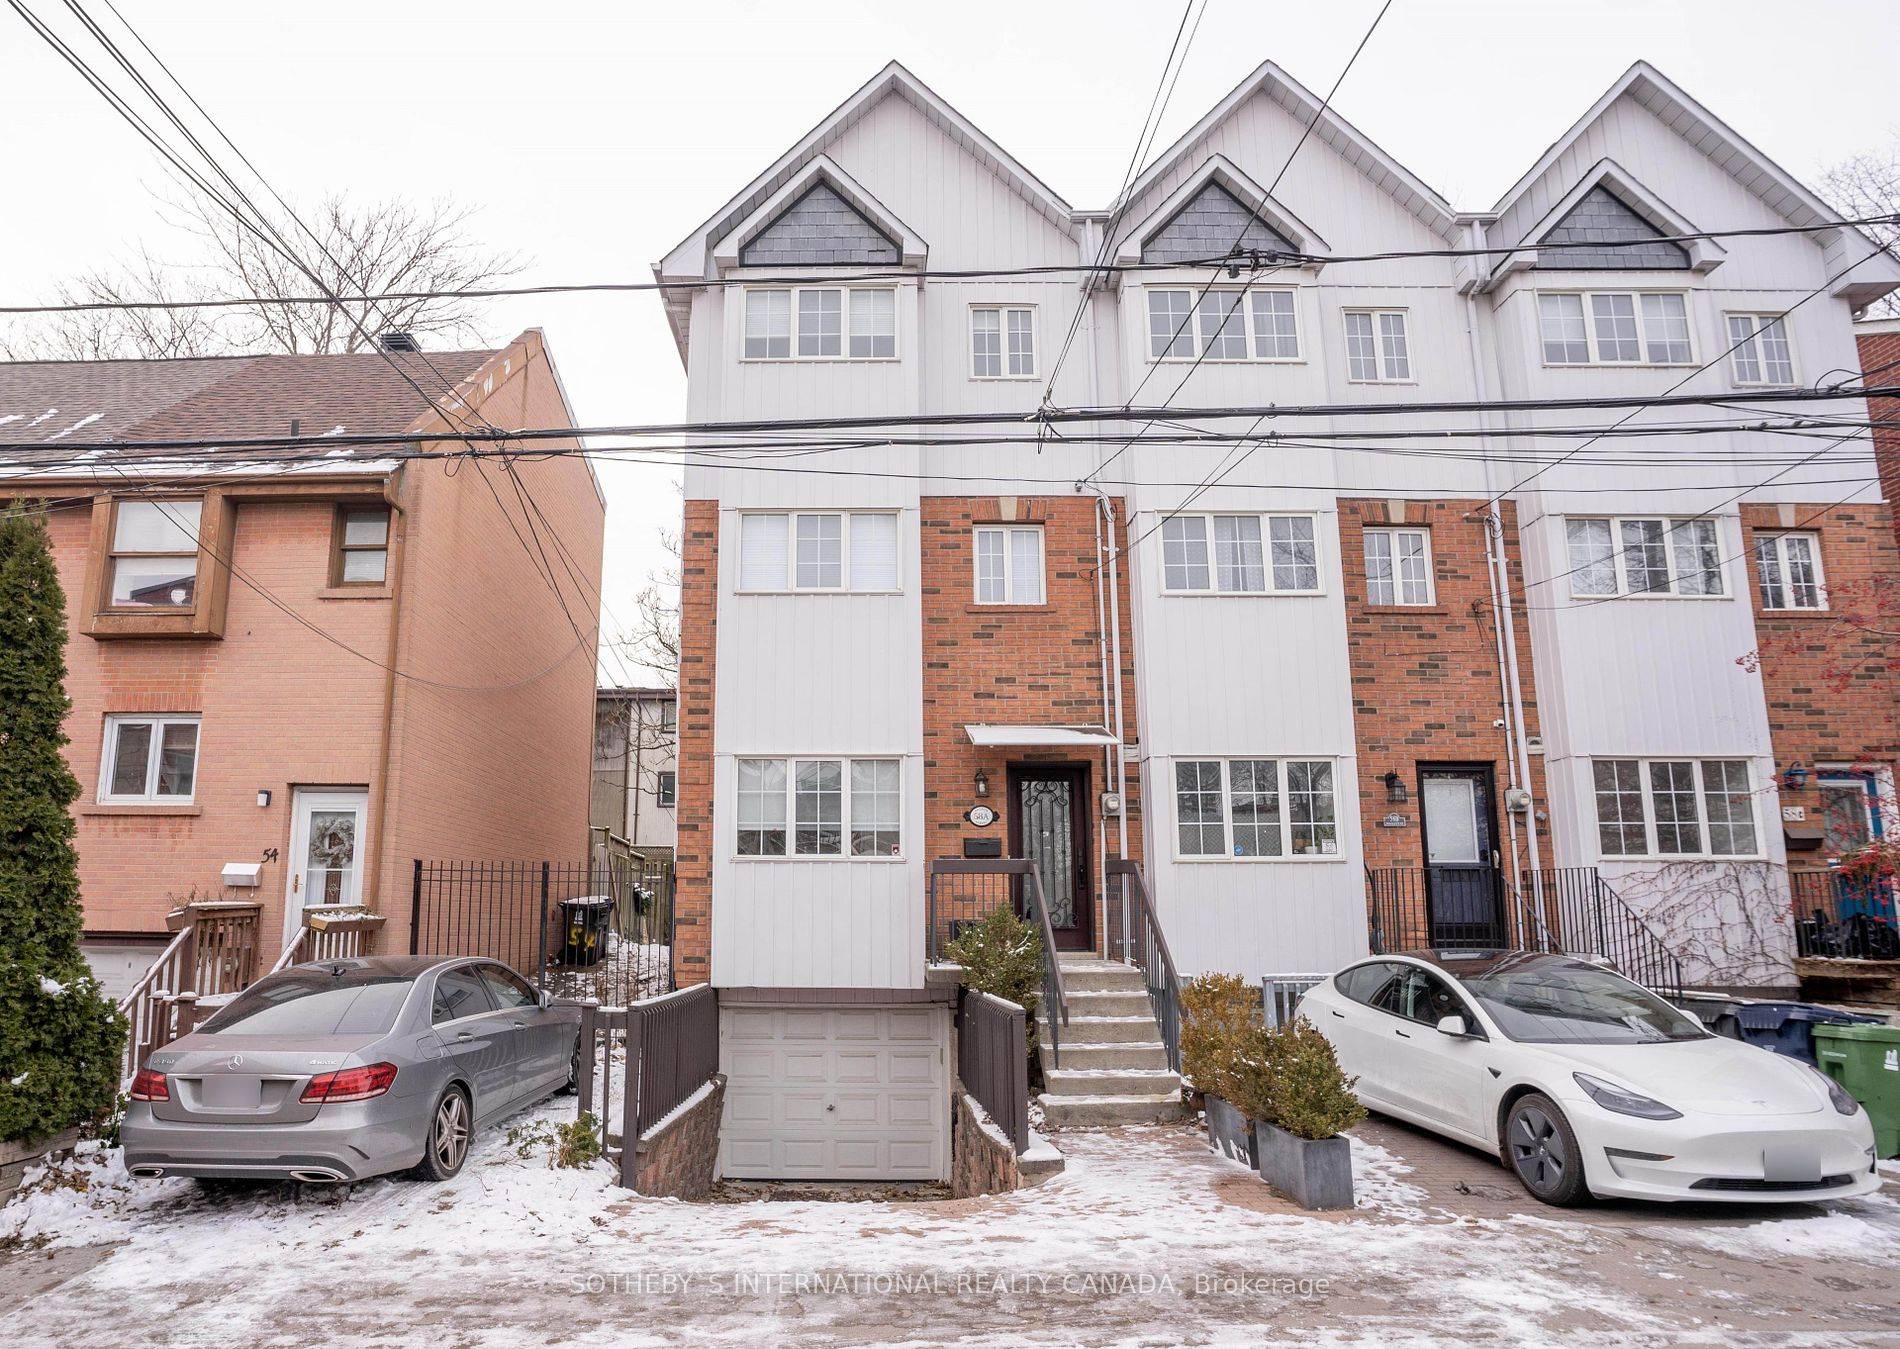 Three Bedroom Townhouse On A Quiet Lane With Garage, Fenced Rear Garden, And Private 3rd Floor Roof Deck.